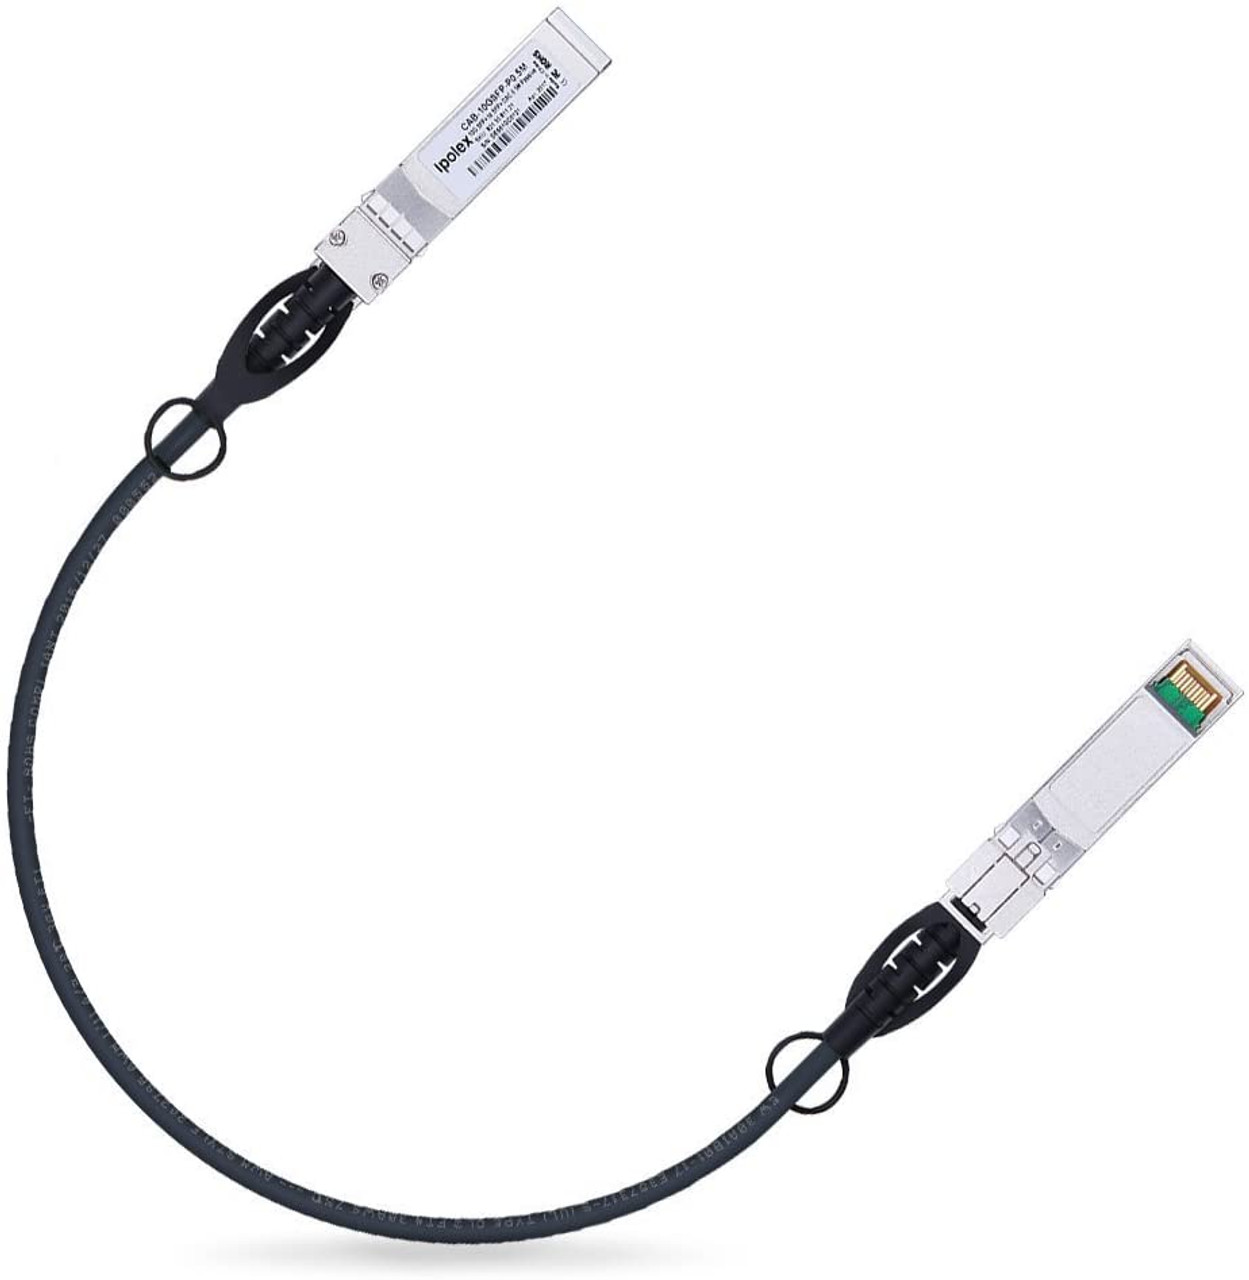 100% Cisco SFP-H10GB-ACU7M Compatible 7m 10G direct attach cable - 10 Gbps Active Twinax Copper Low Power 2x SFP+ Pluggable Connector - 10GbE Mini GBIC/Transceiver DAC forFirepower/ASR9000 /ASR1000 Hot-Swappable MSA Compliant Lifetime Warranty